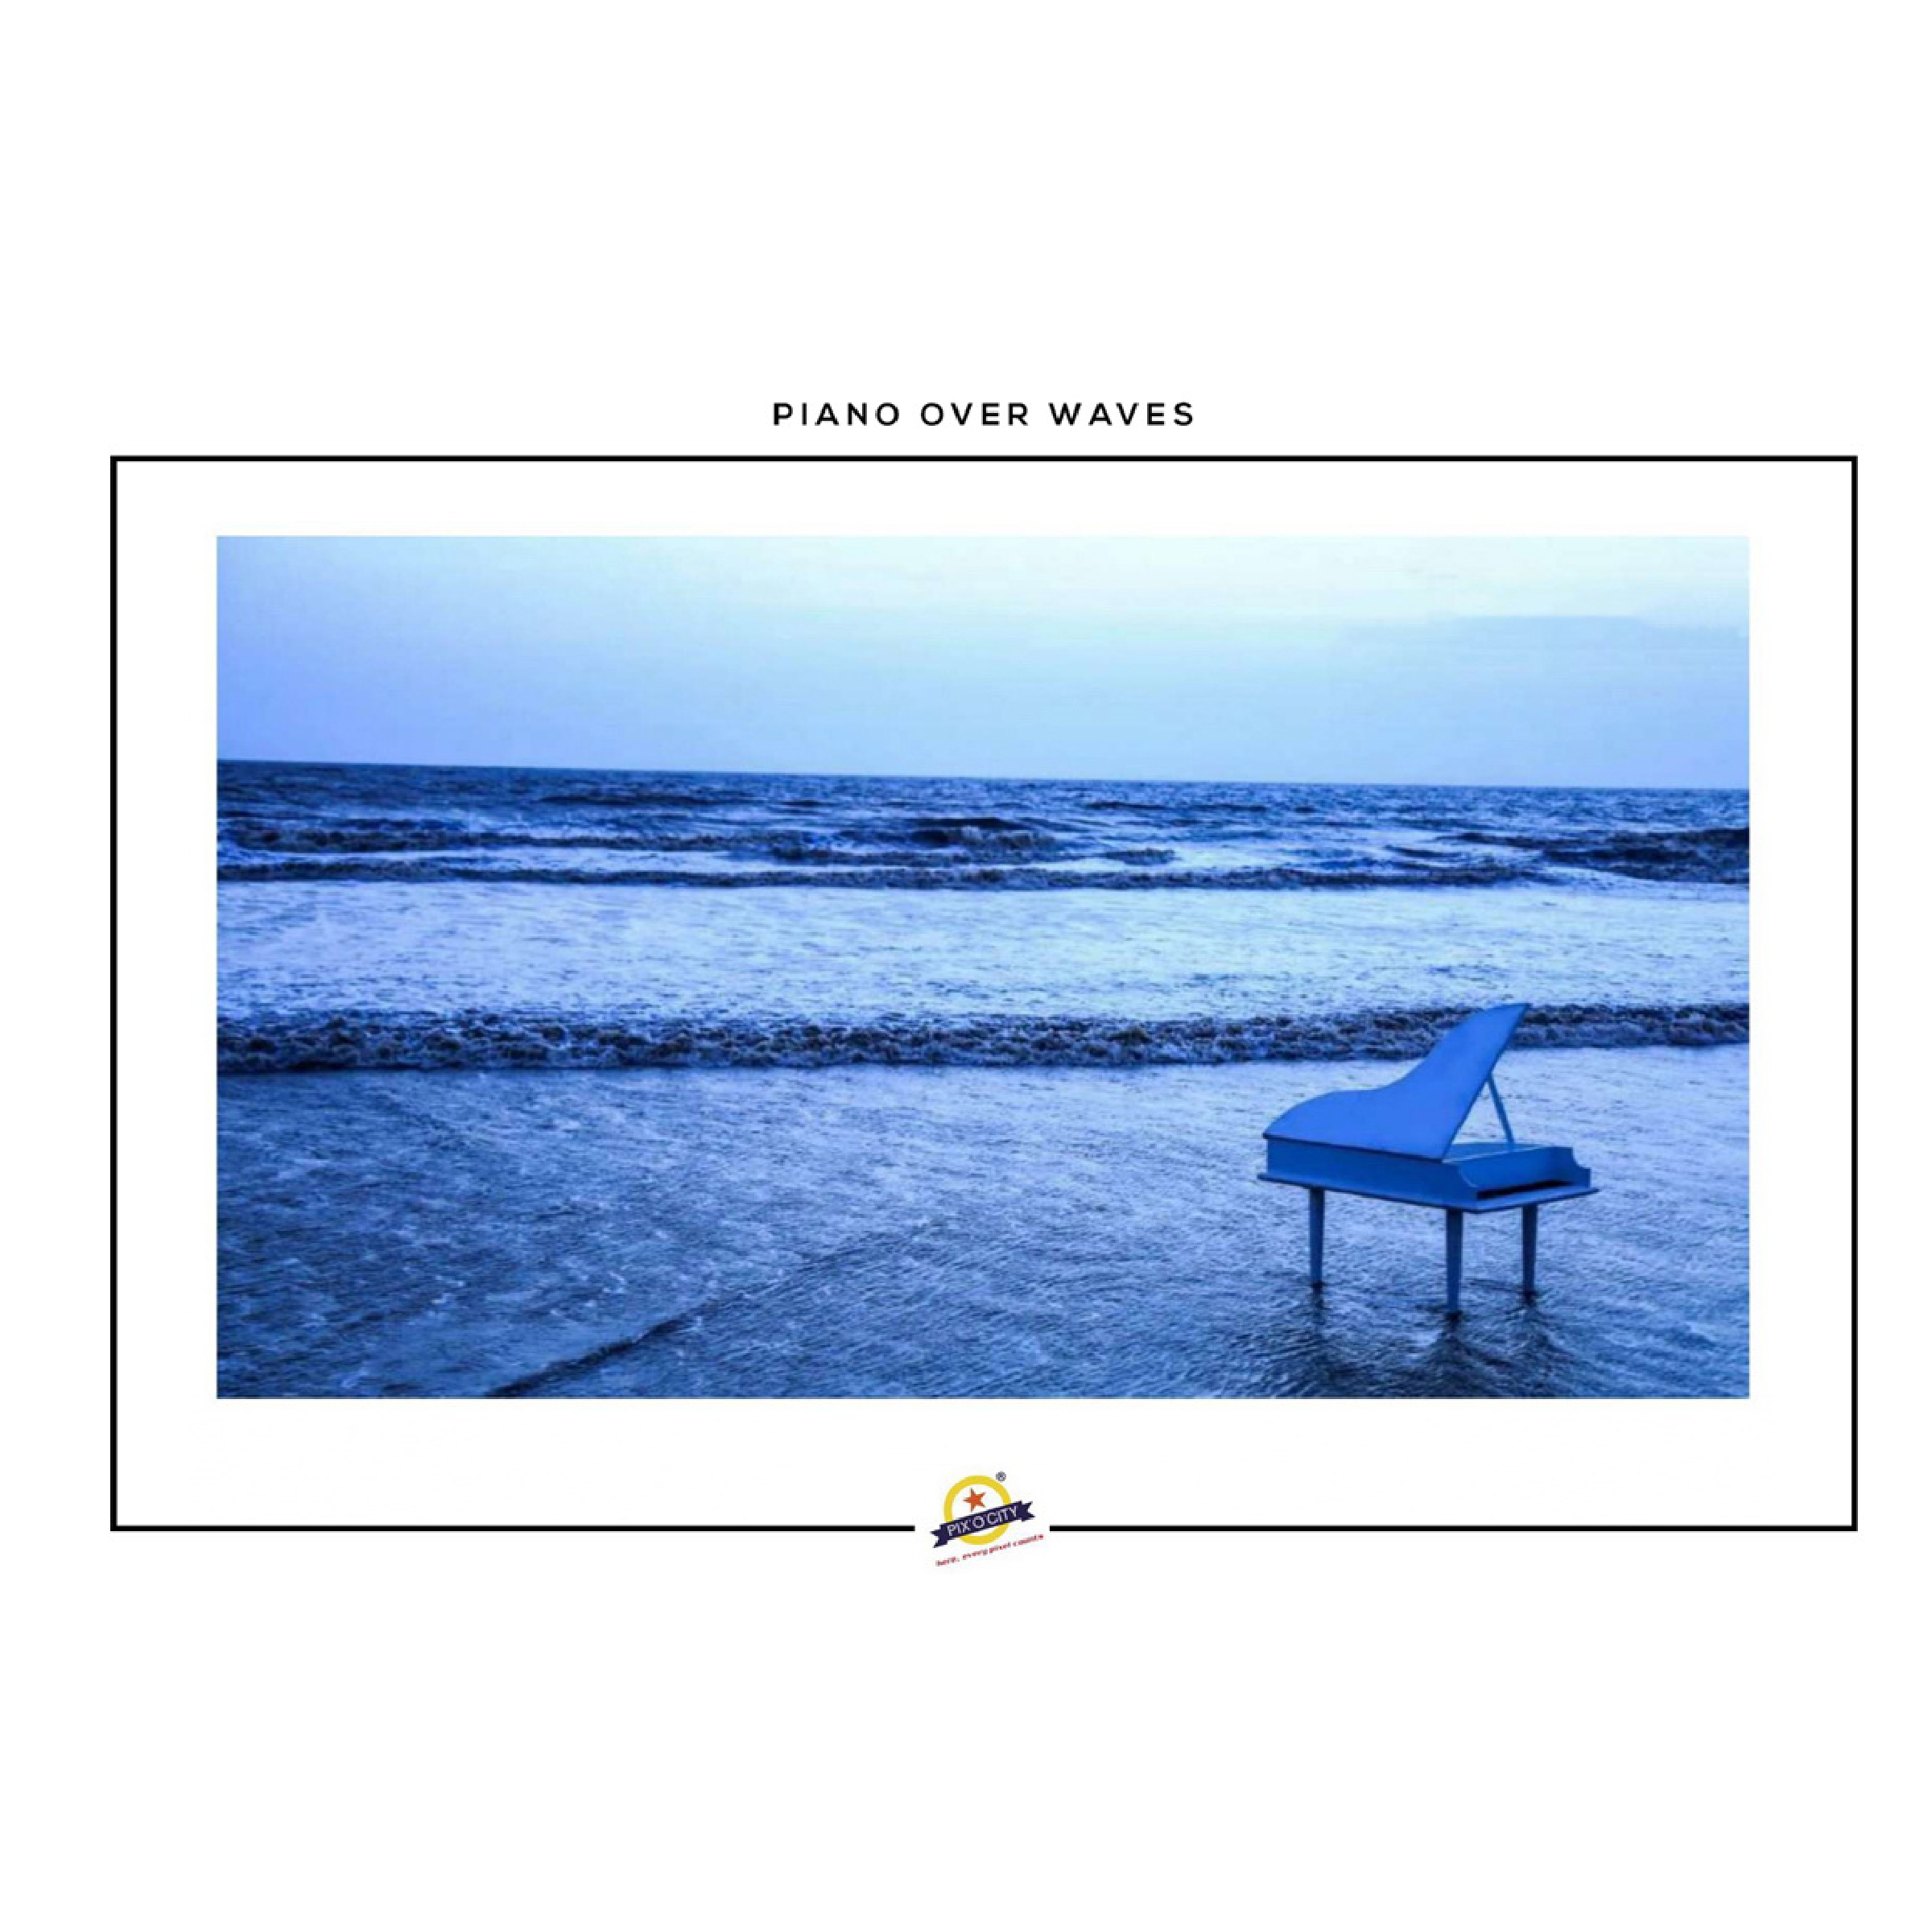 PIANO OVER WAVES